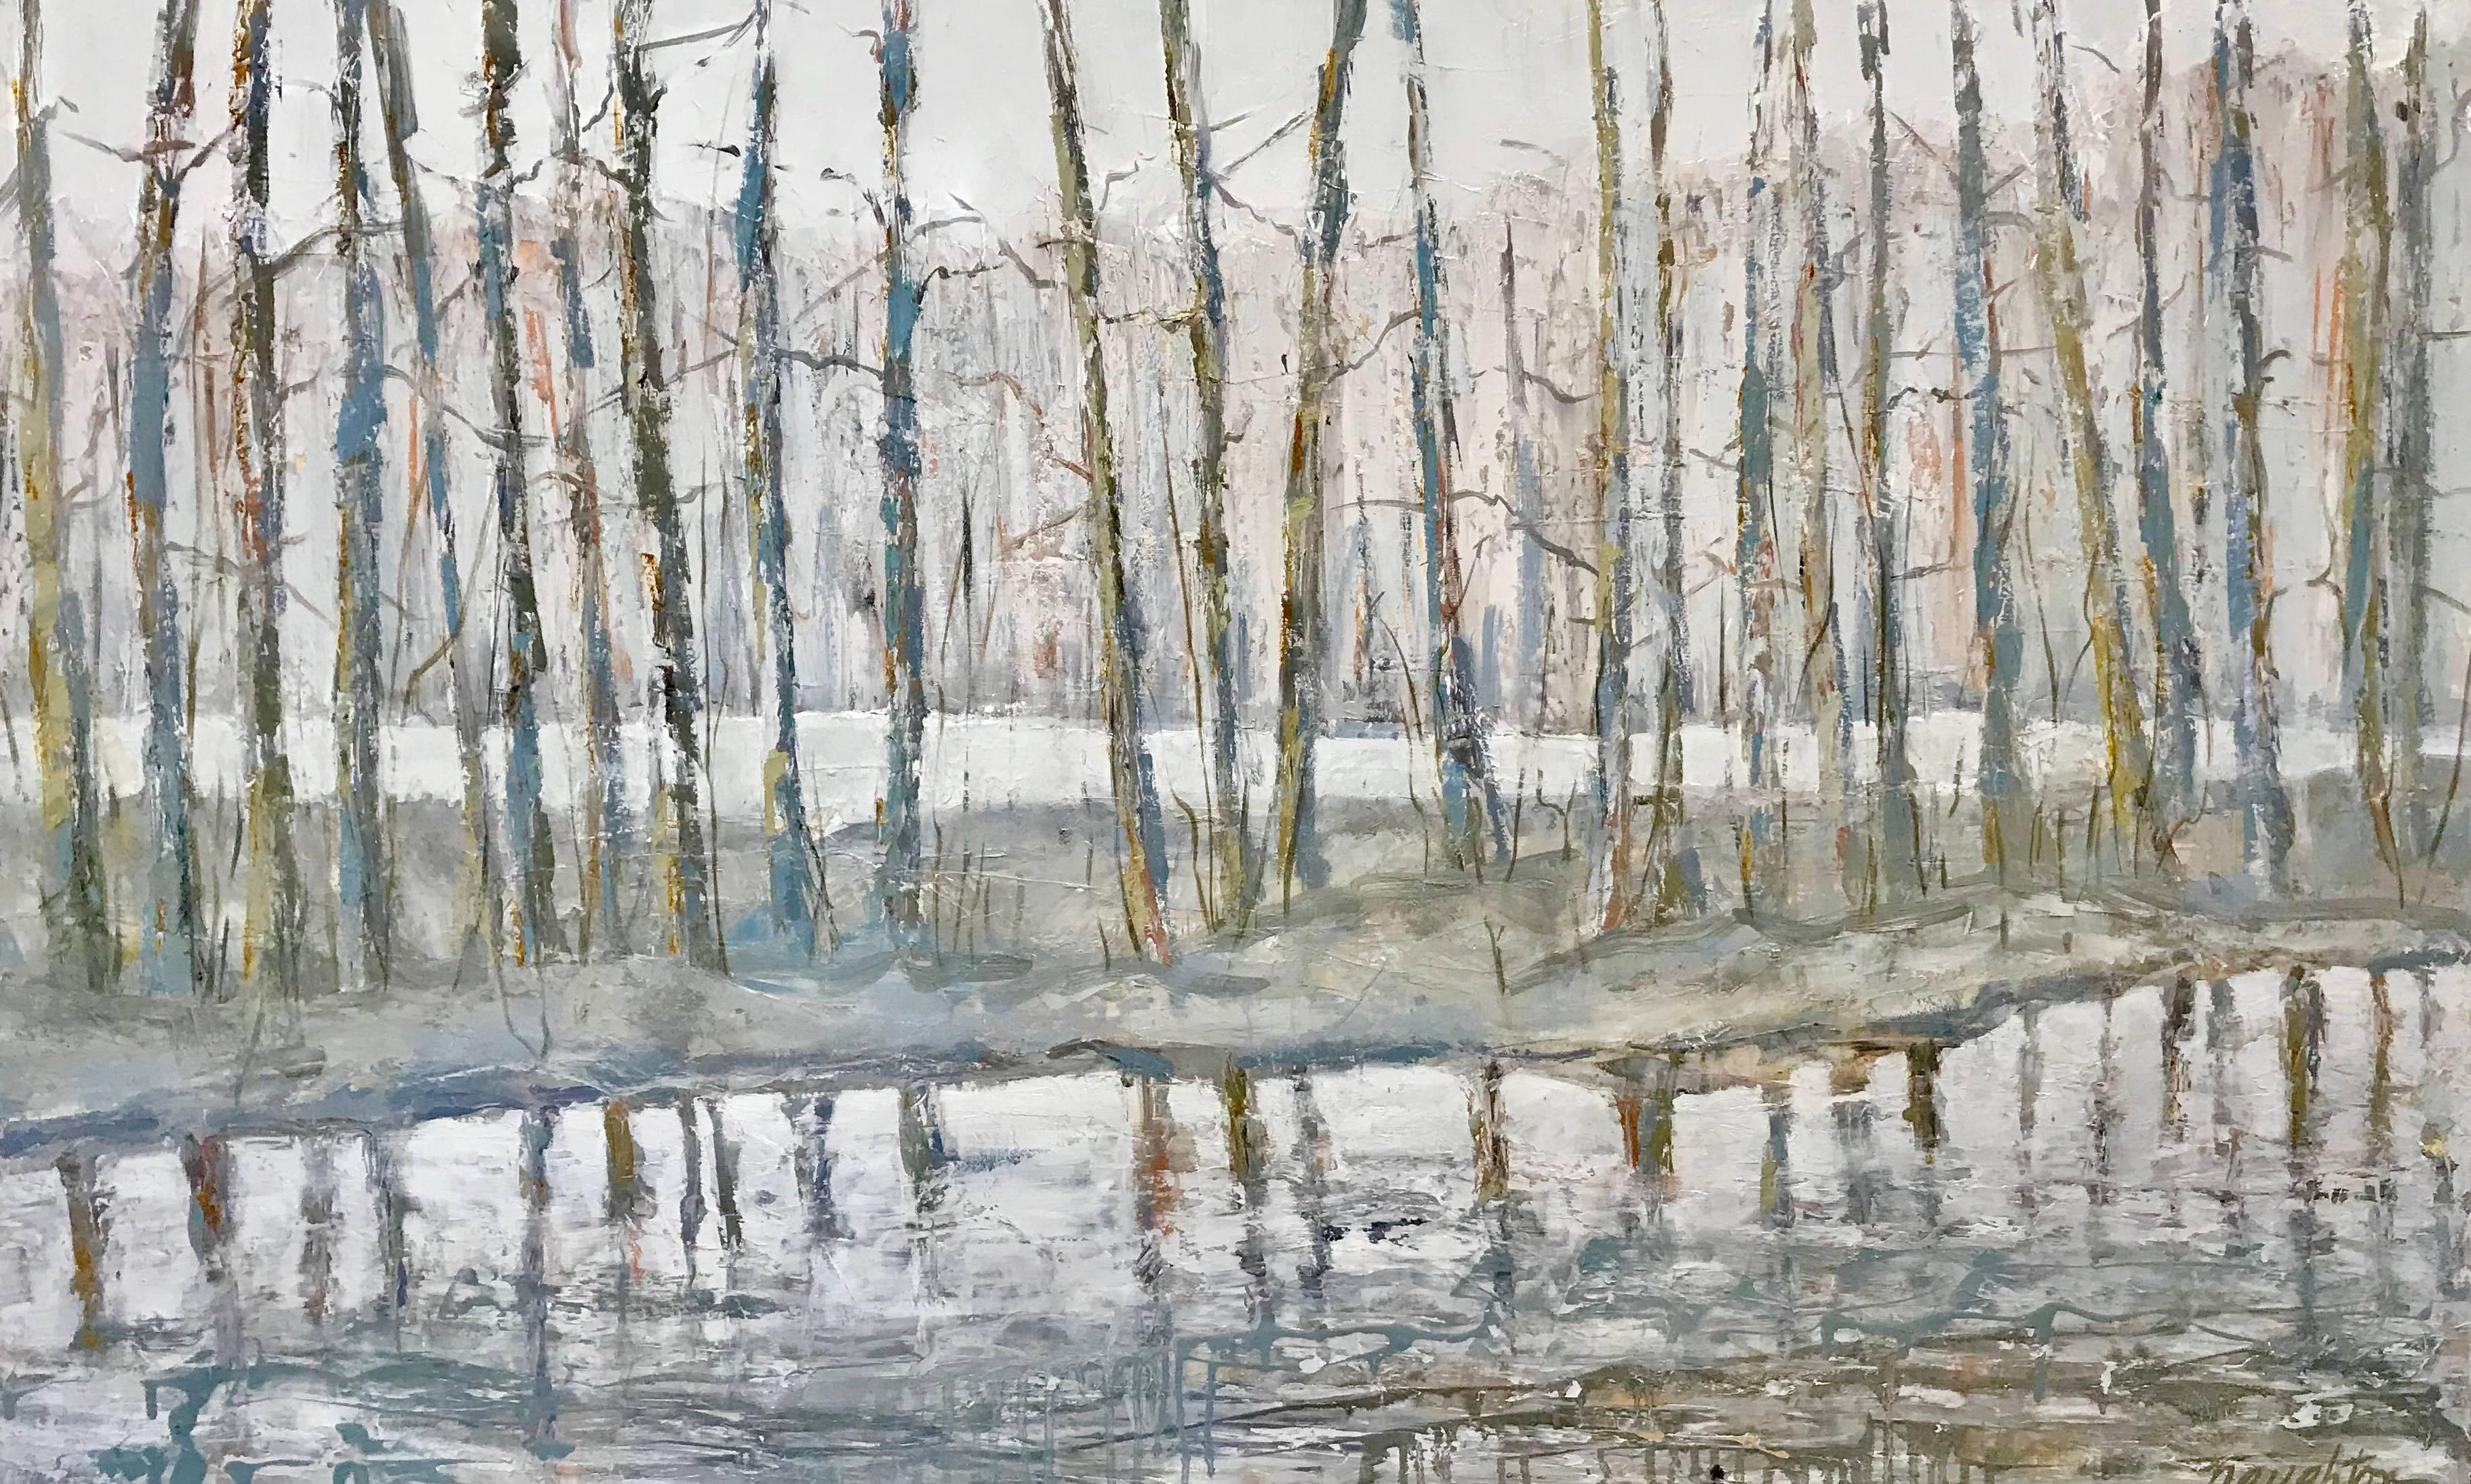 American artist Maureen Naughton created this large size framed Impressionist painting entitled 'Silver Waters' in 2017. Featuring a winter theme, Maureen depicted a series of elegant, yet leafless trees, planted along a body of water in which they